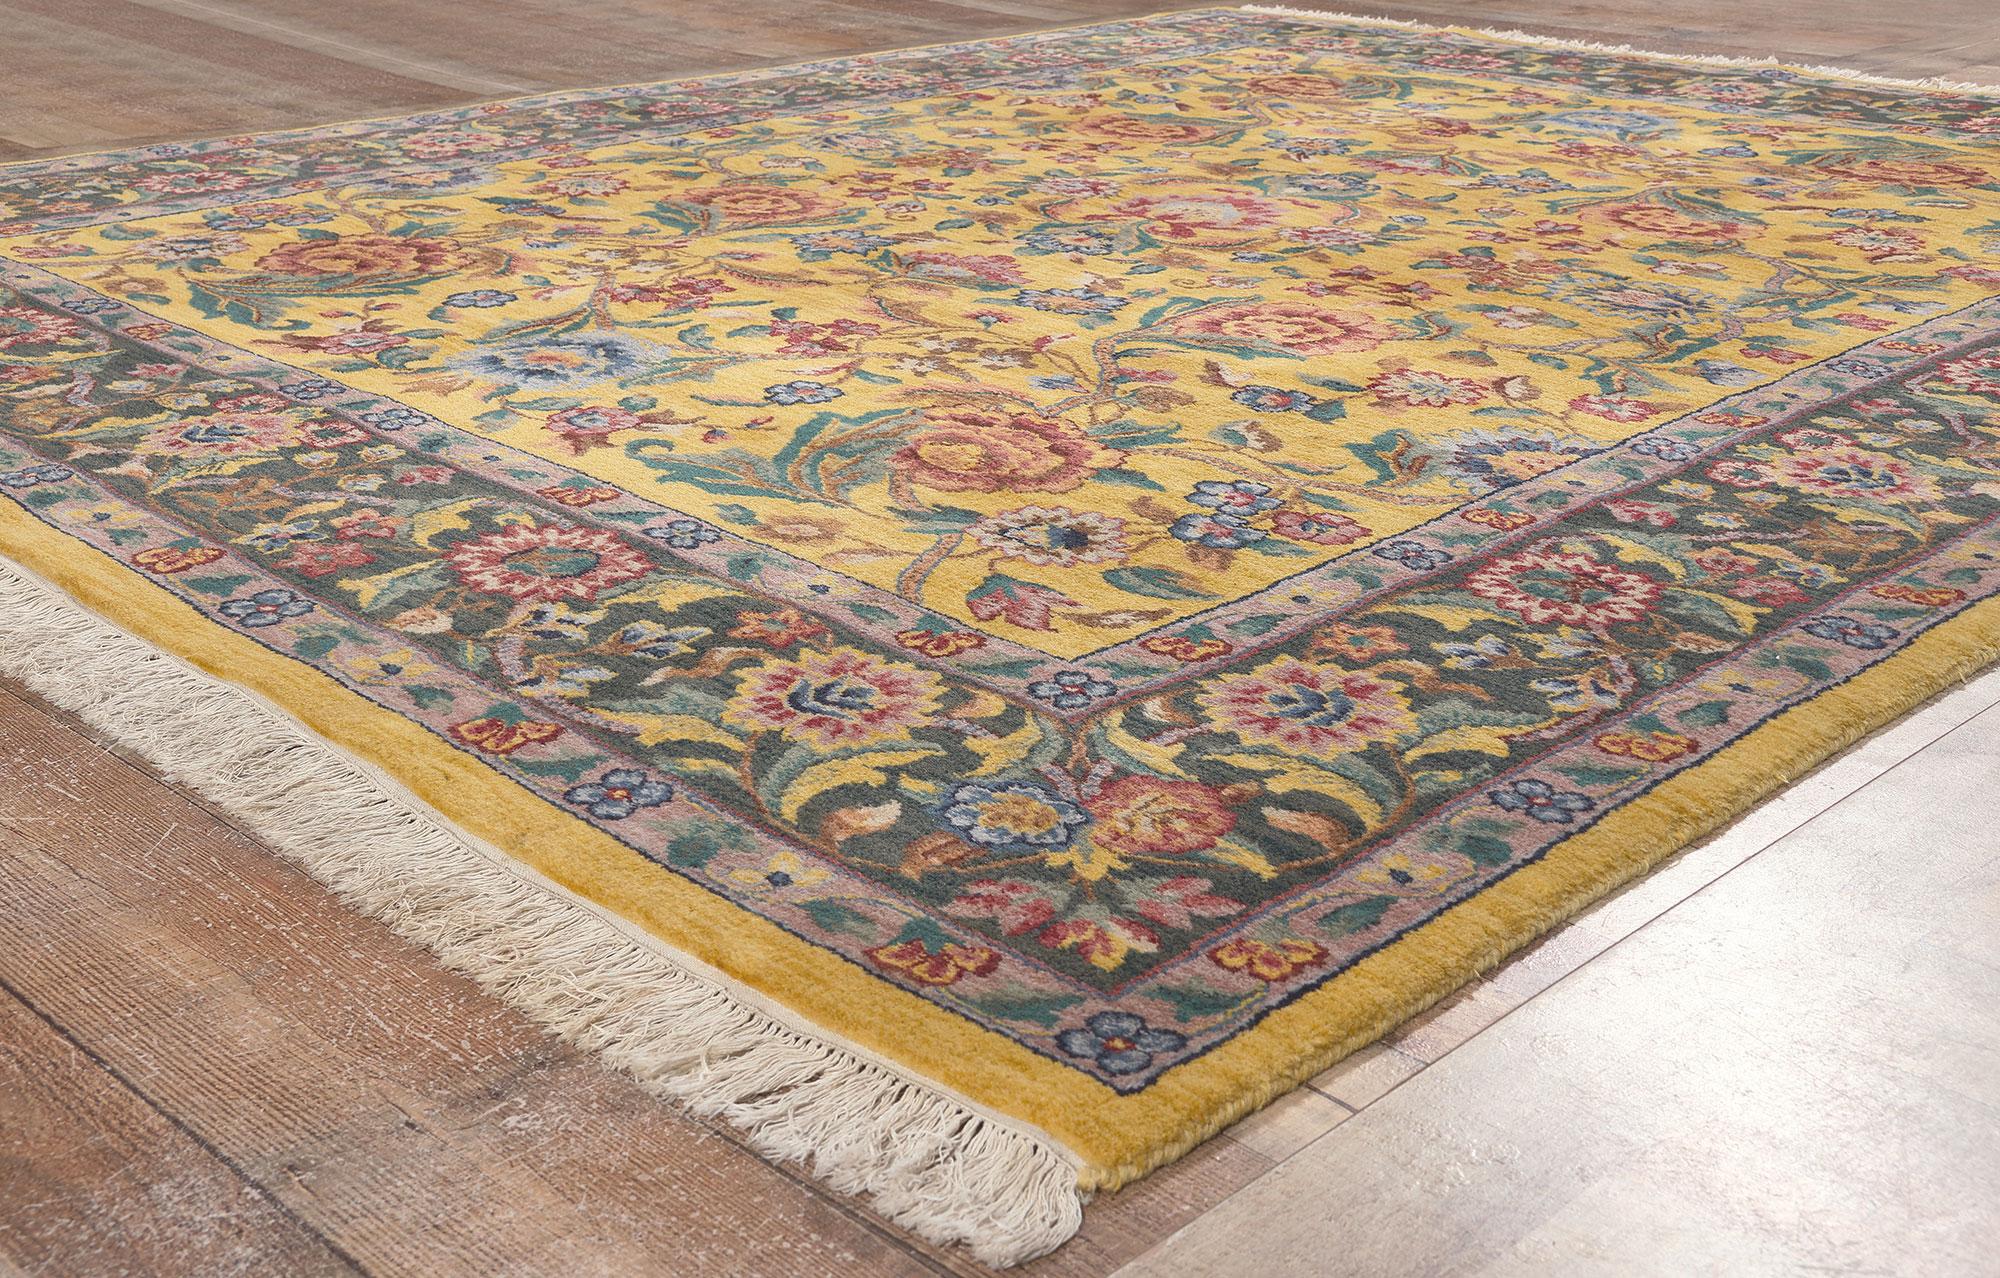 Vintage Yellow Indian Tabriz Rug with English Country Cottage and Artisan Style In Good Condition For Sale In Dallas, TX